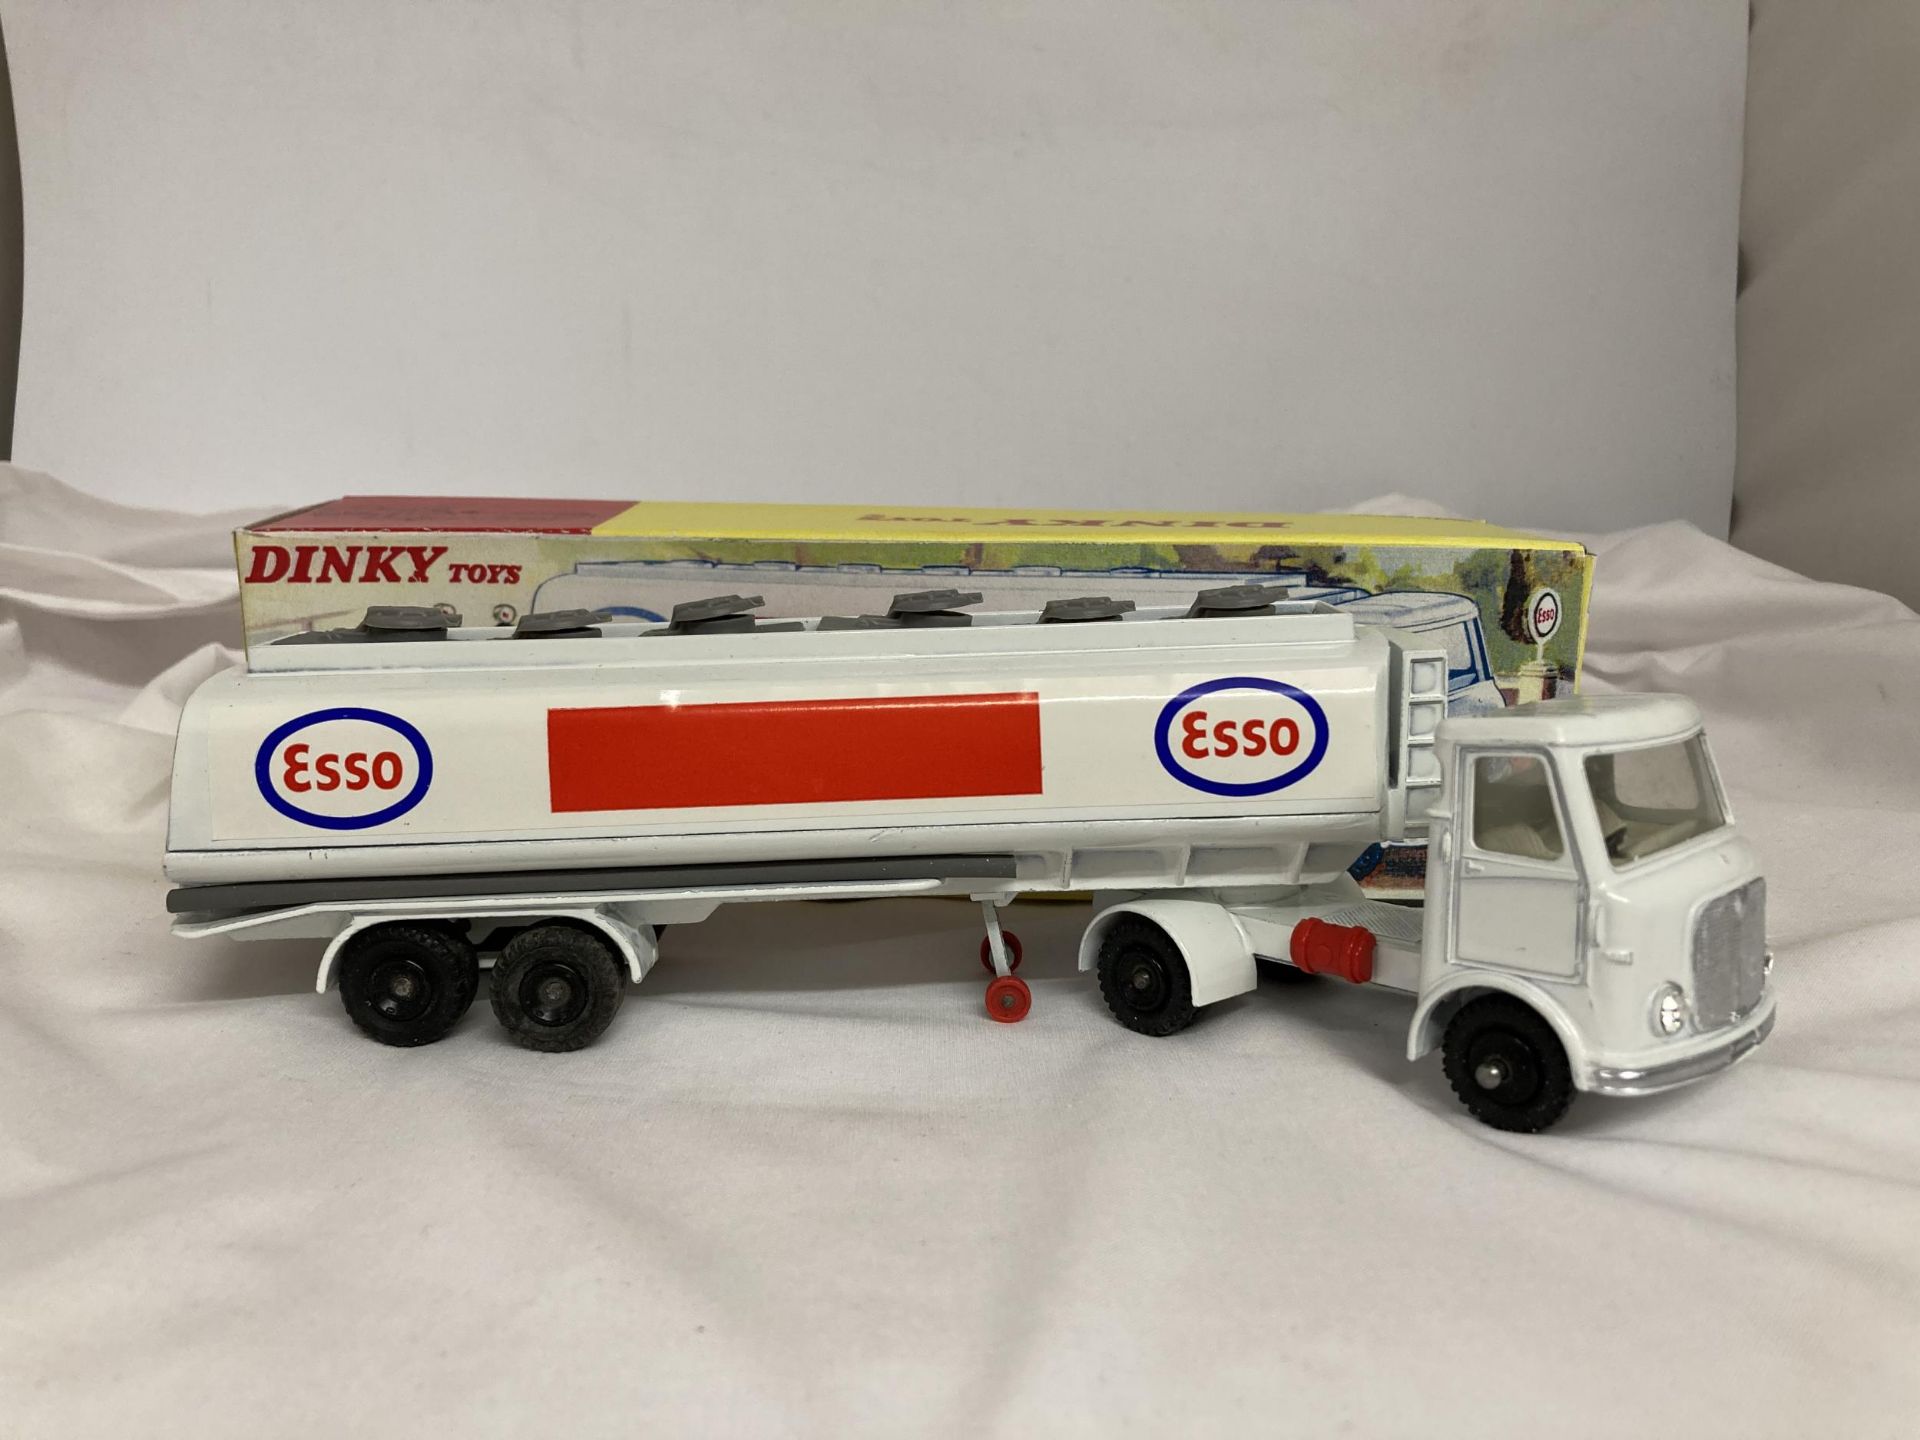 TWO BOXED DINKY MODELS NO. 945 - AN ESSO FUEL TANKER AND NO. 981 - A HORSEBOX - Image 2 of 4